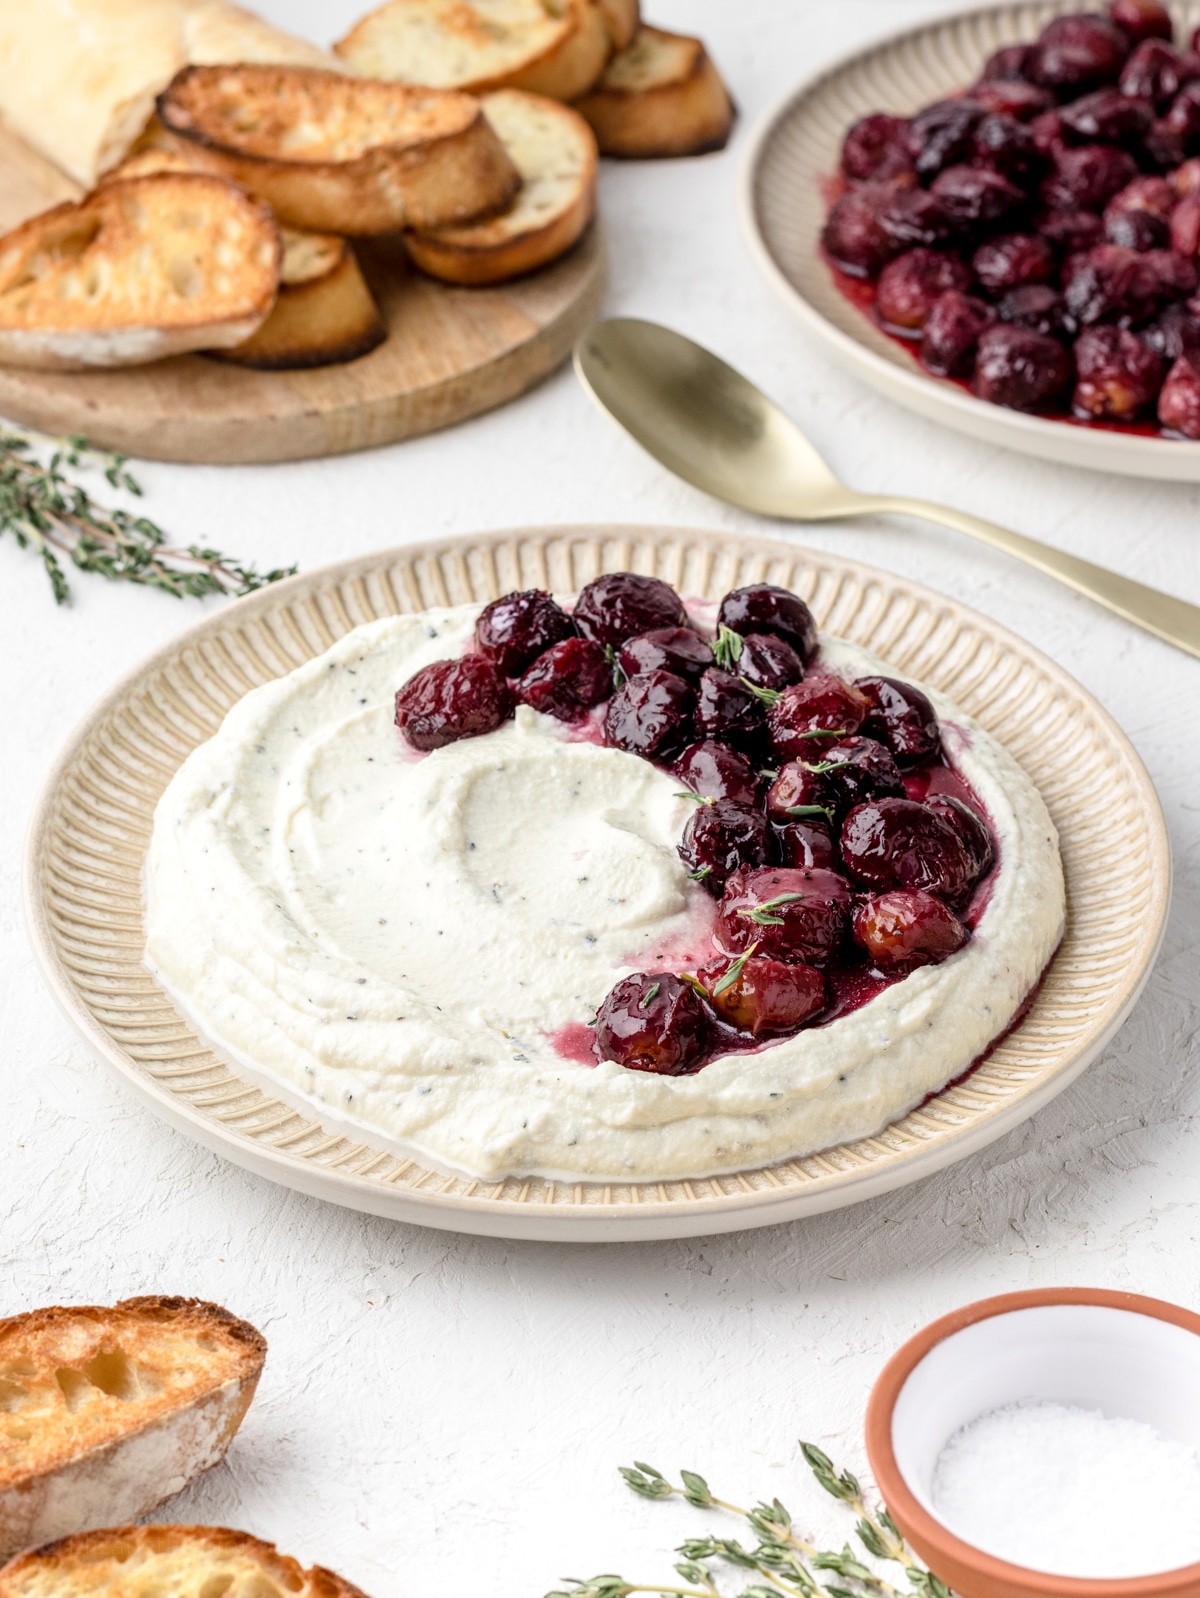 Ricotta Dip with Roasted Grapes ready to be ate.